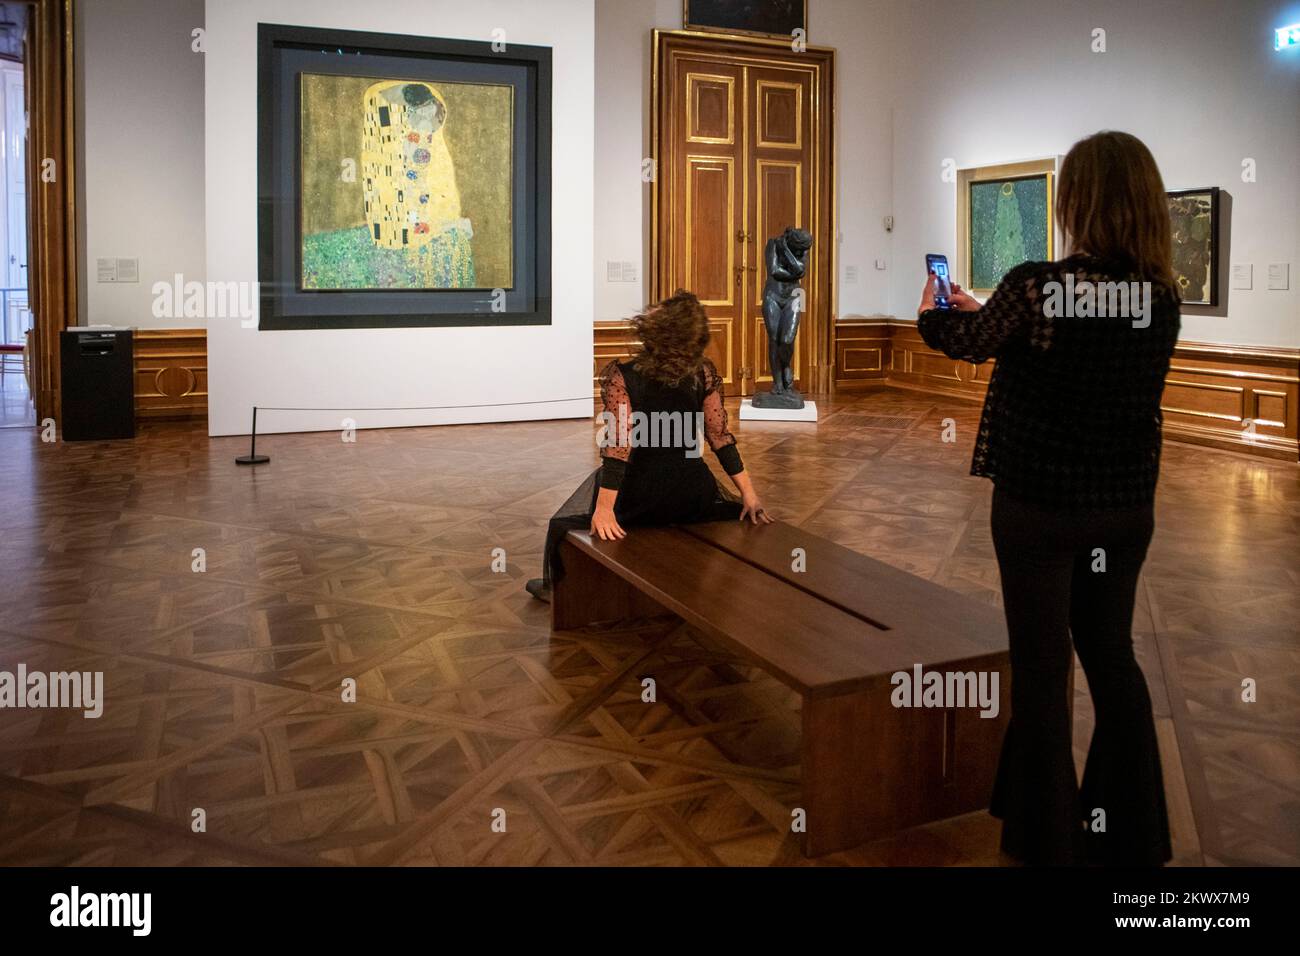 Painting The Kiss by Gustav Klimt Inside Interior of Schloss Belvedere Palace and museum, Vienna, Austria.   The heart of the Belvedere collection is Stock Photo